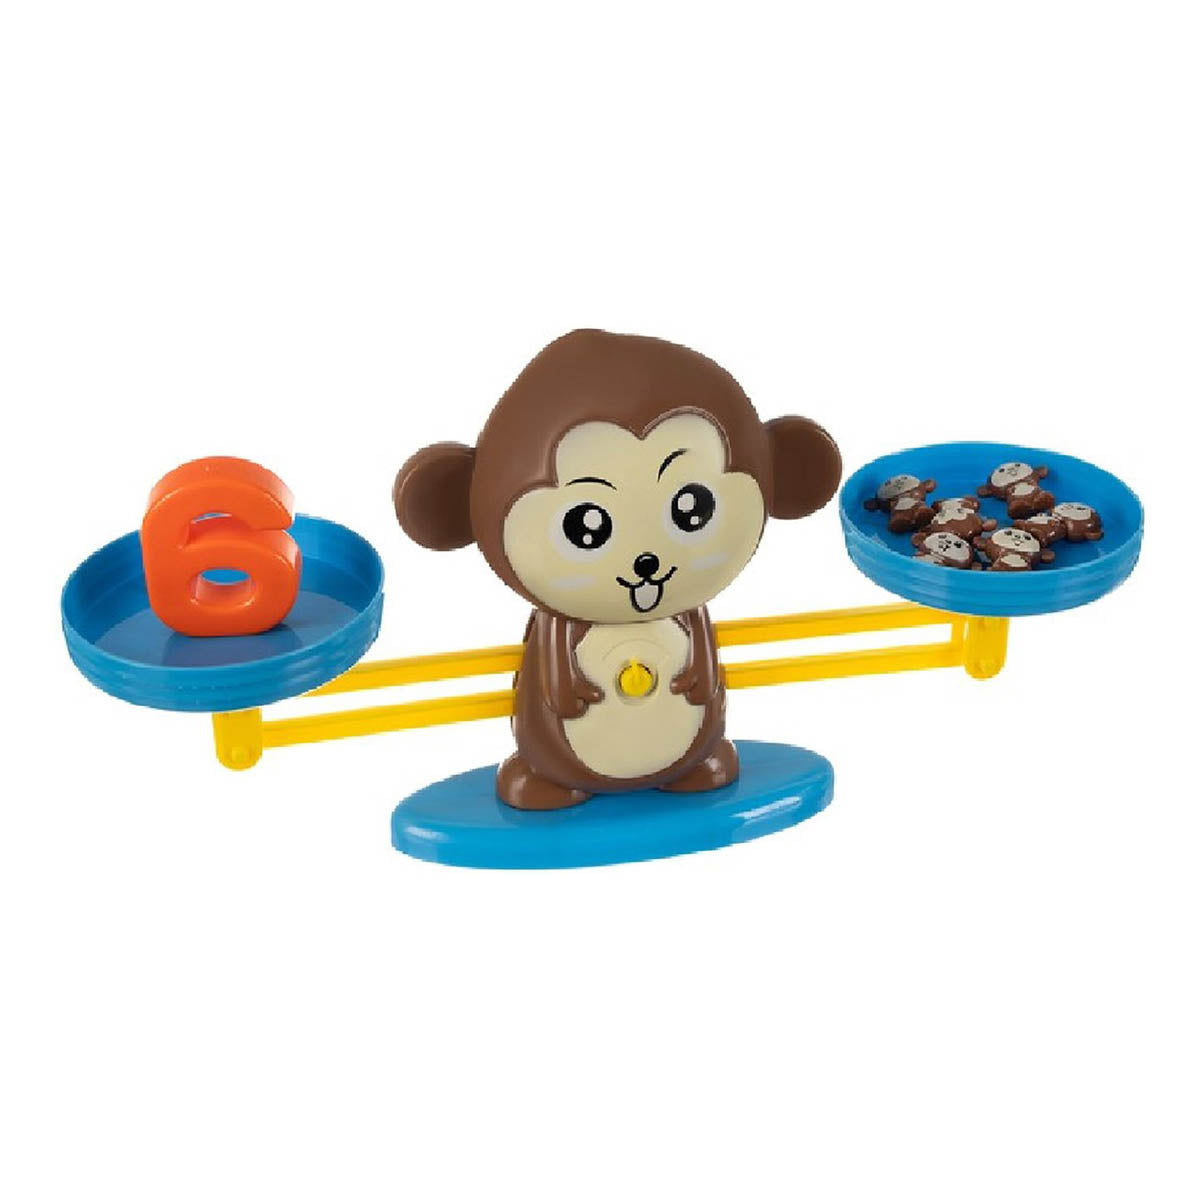 <tc>Ariko</tc> Montessori Math Balance Game Monkey - Learning to Count - Interactive Toys - Abacus - Counting Scale - Educational